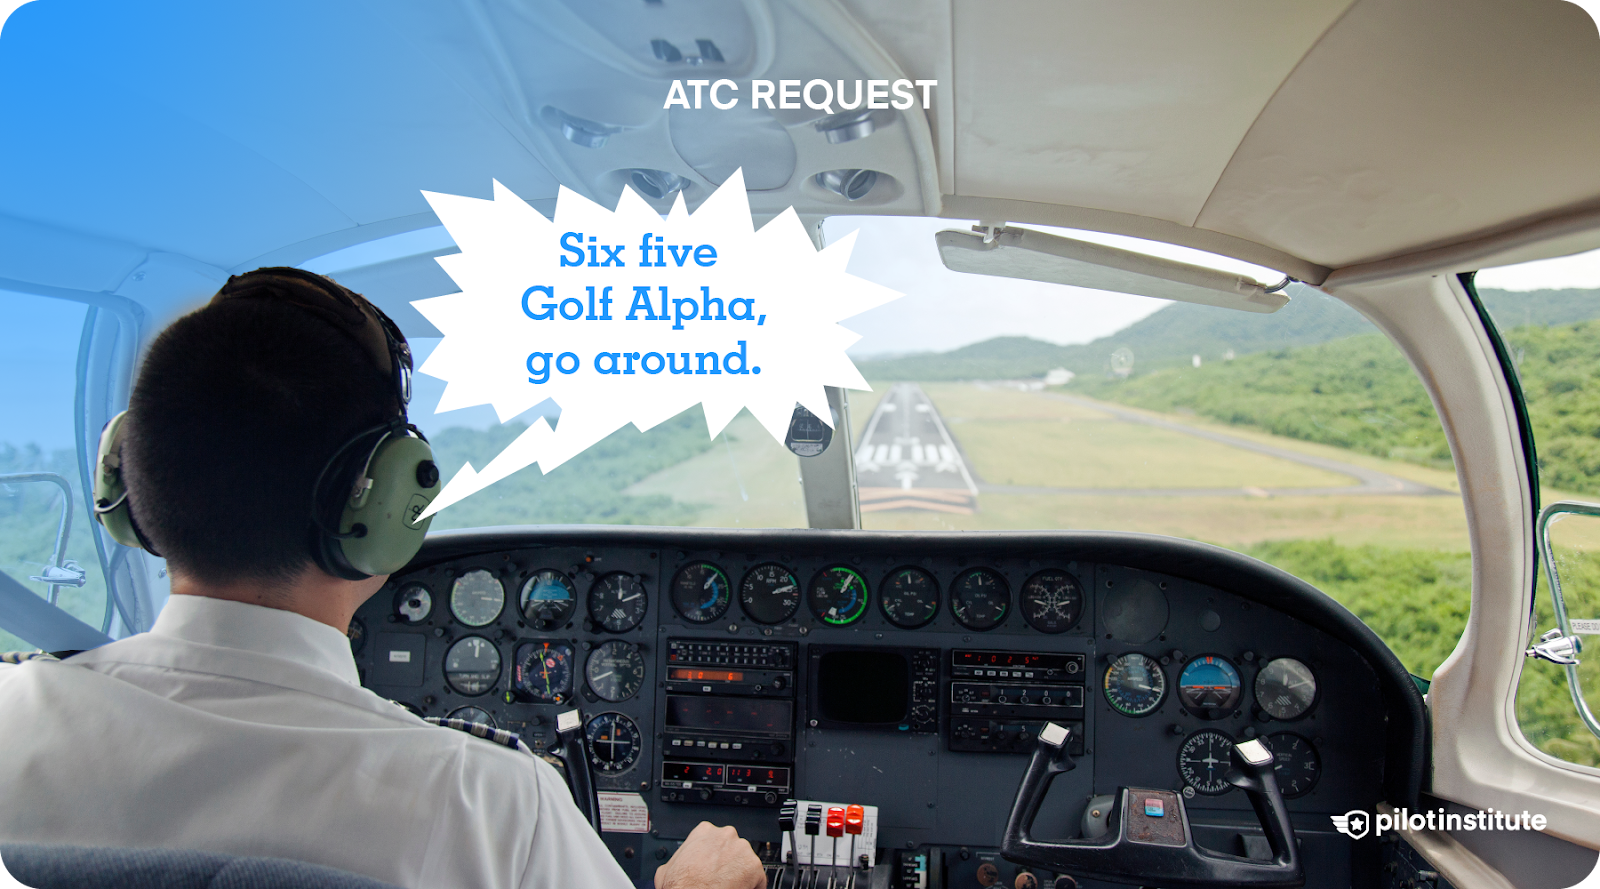 ATC informs a pilot on short approach to go around.